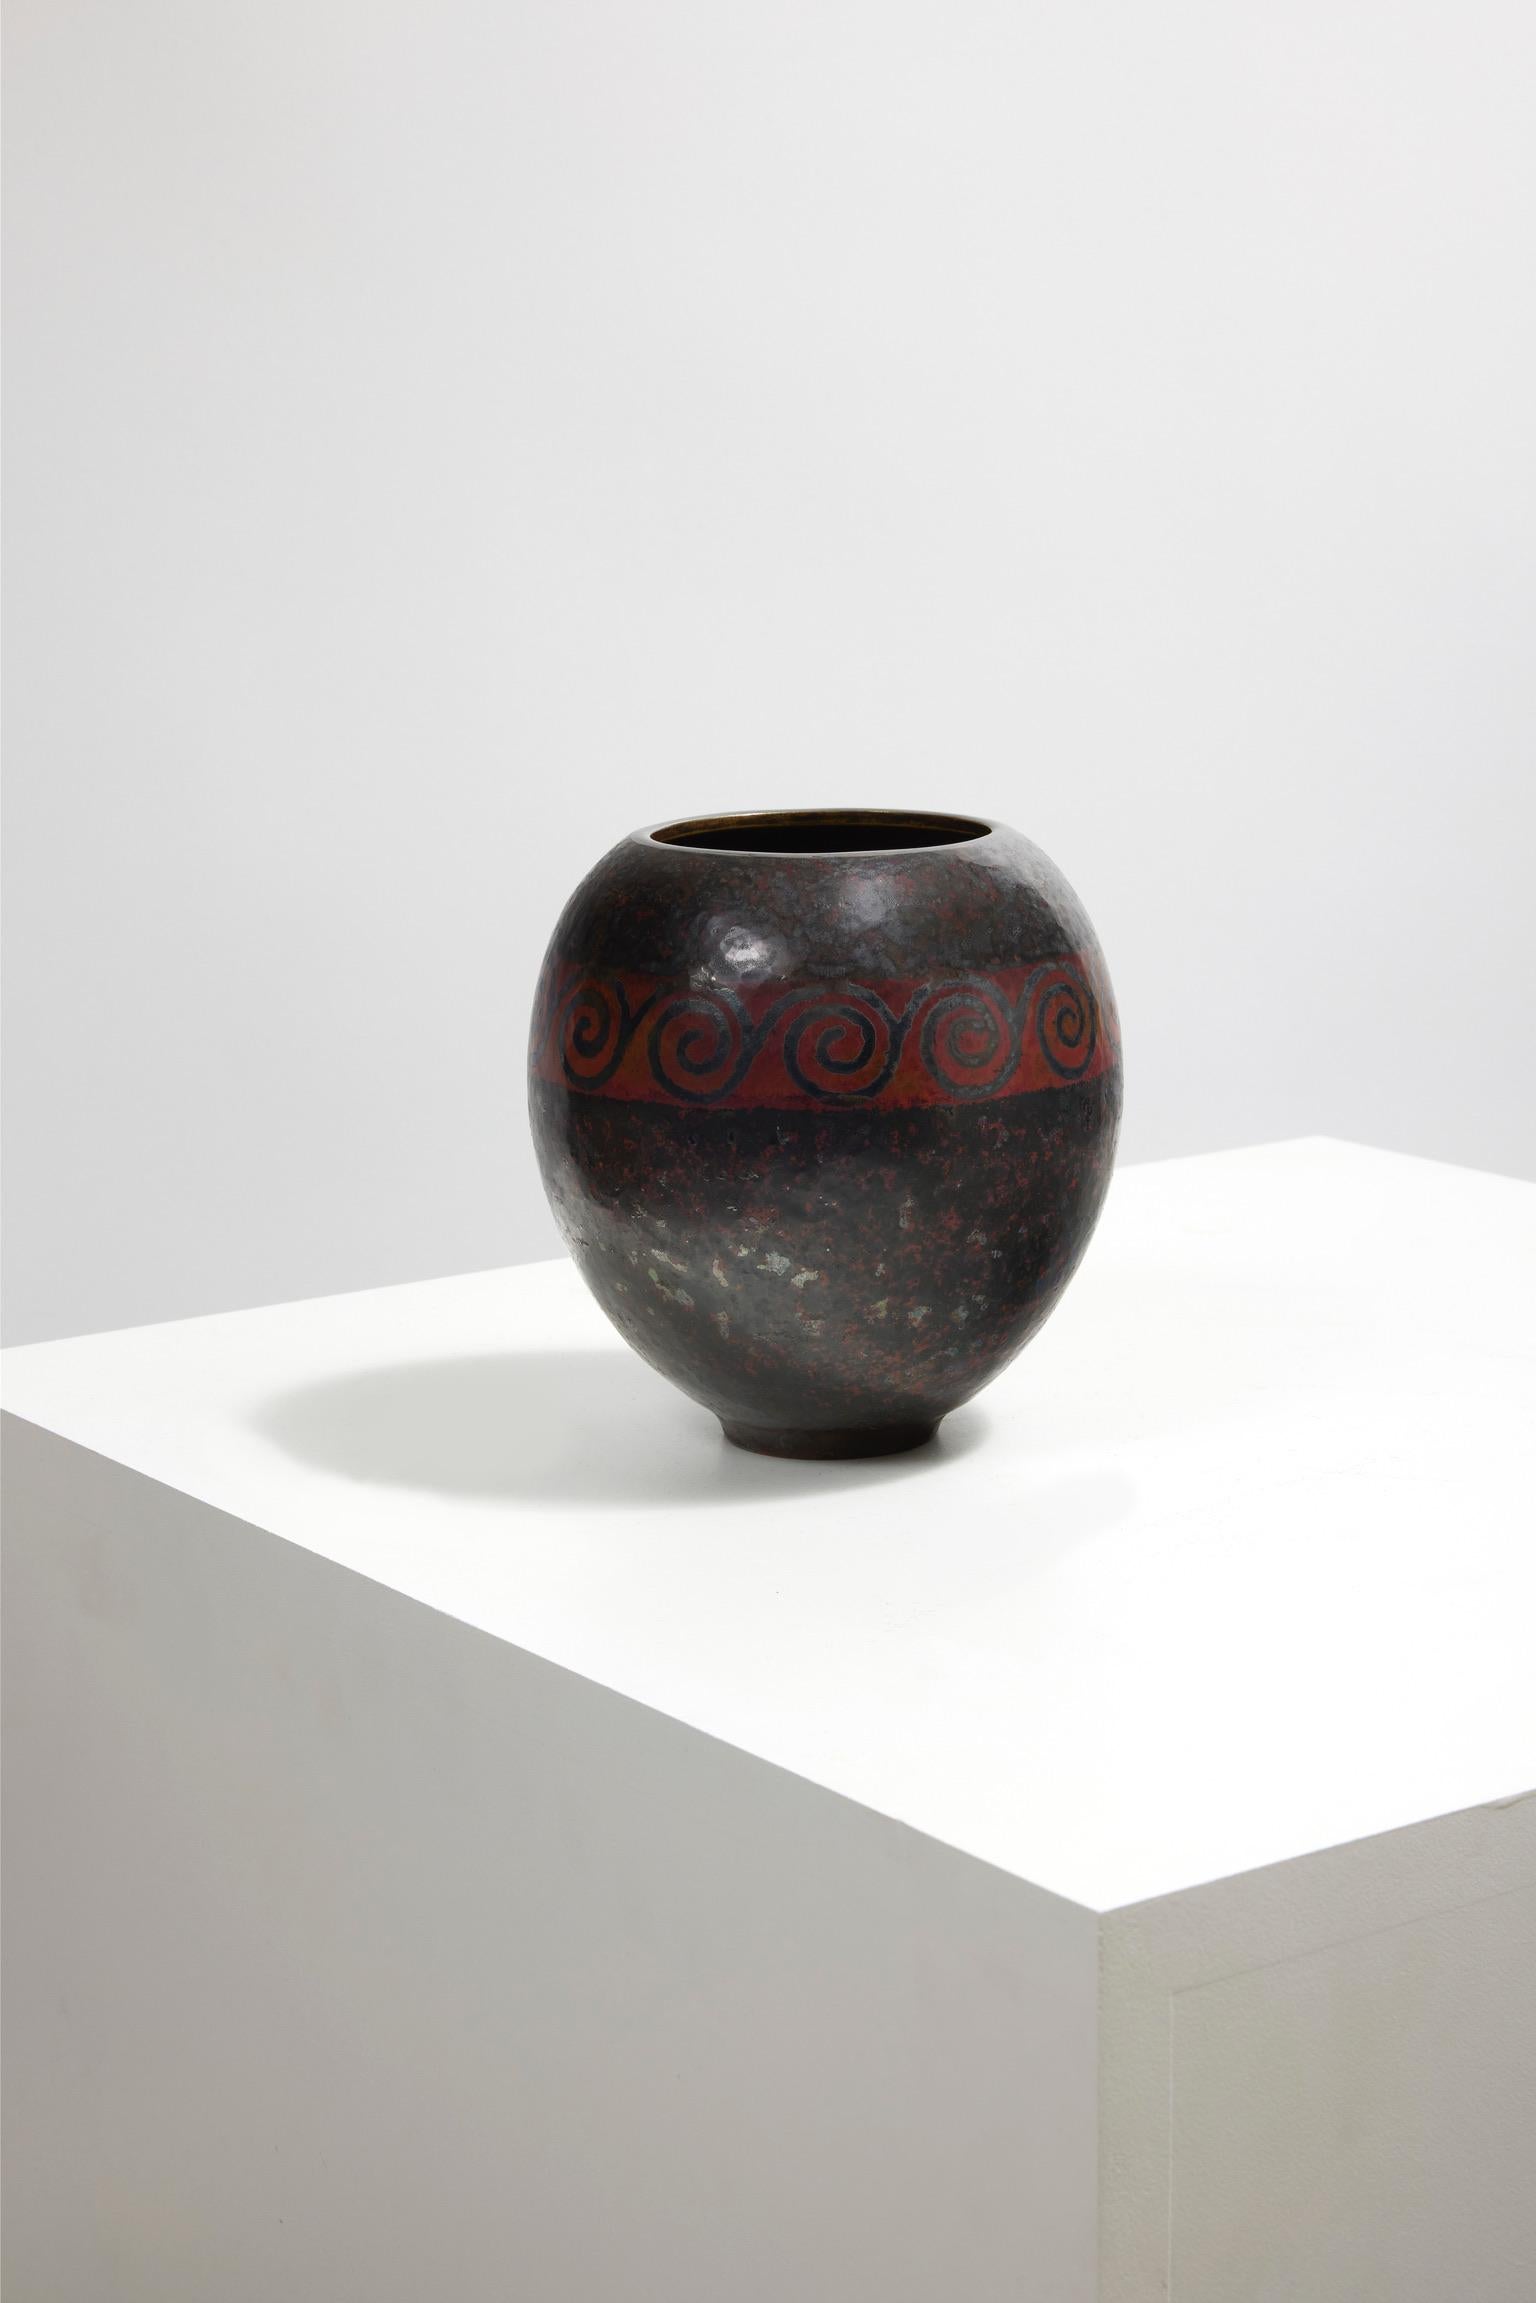 Ovoid vase in copper brassware hammered decorated with a horizontal geometric frieze of spirals inlaid in maillechort on a red background with brown patina.

Signature in hollow on the back and dated 